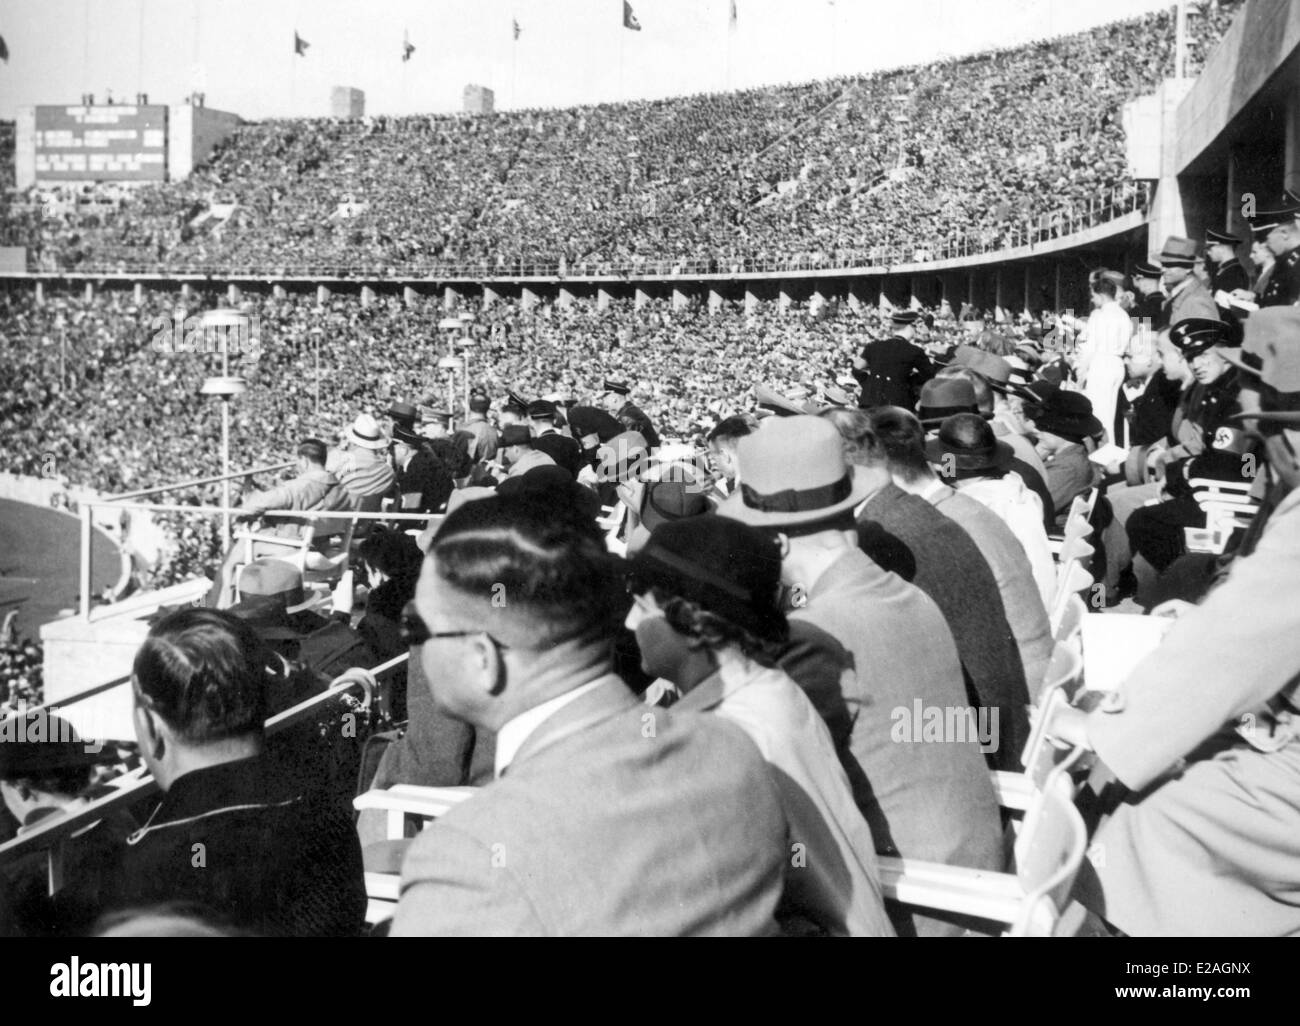 Spectators and VIP box during the Olympics in Berlin 1936 Stock Photo